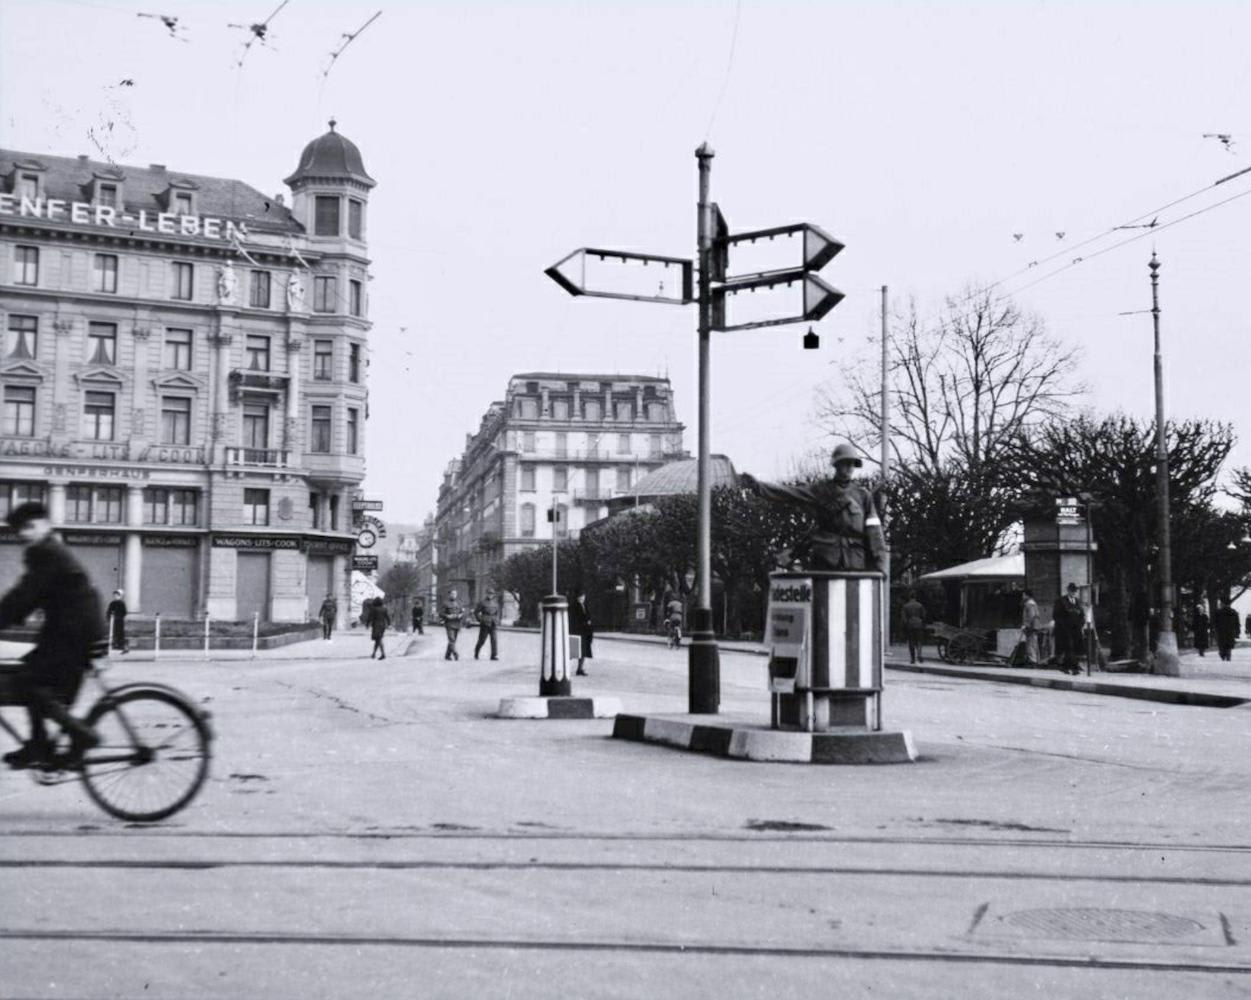 #onthisday Due to Germany's military escalation in Central Europe, the Swiss Federal Council ordered the mobilization of the Swiss Armed Forces for the following day on 1 September 1939. Photo from Lucerne: All direction signs were removed and a soldier controls the traffic.